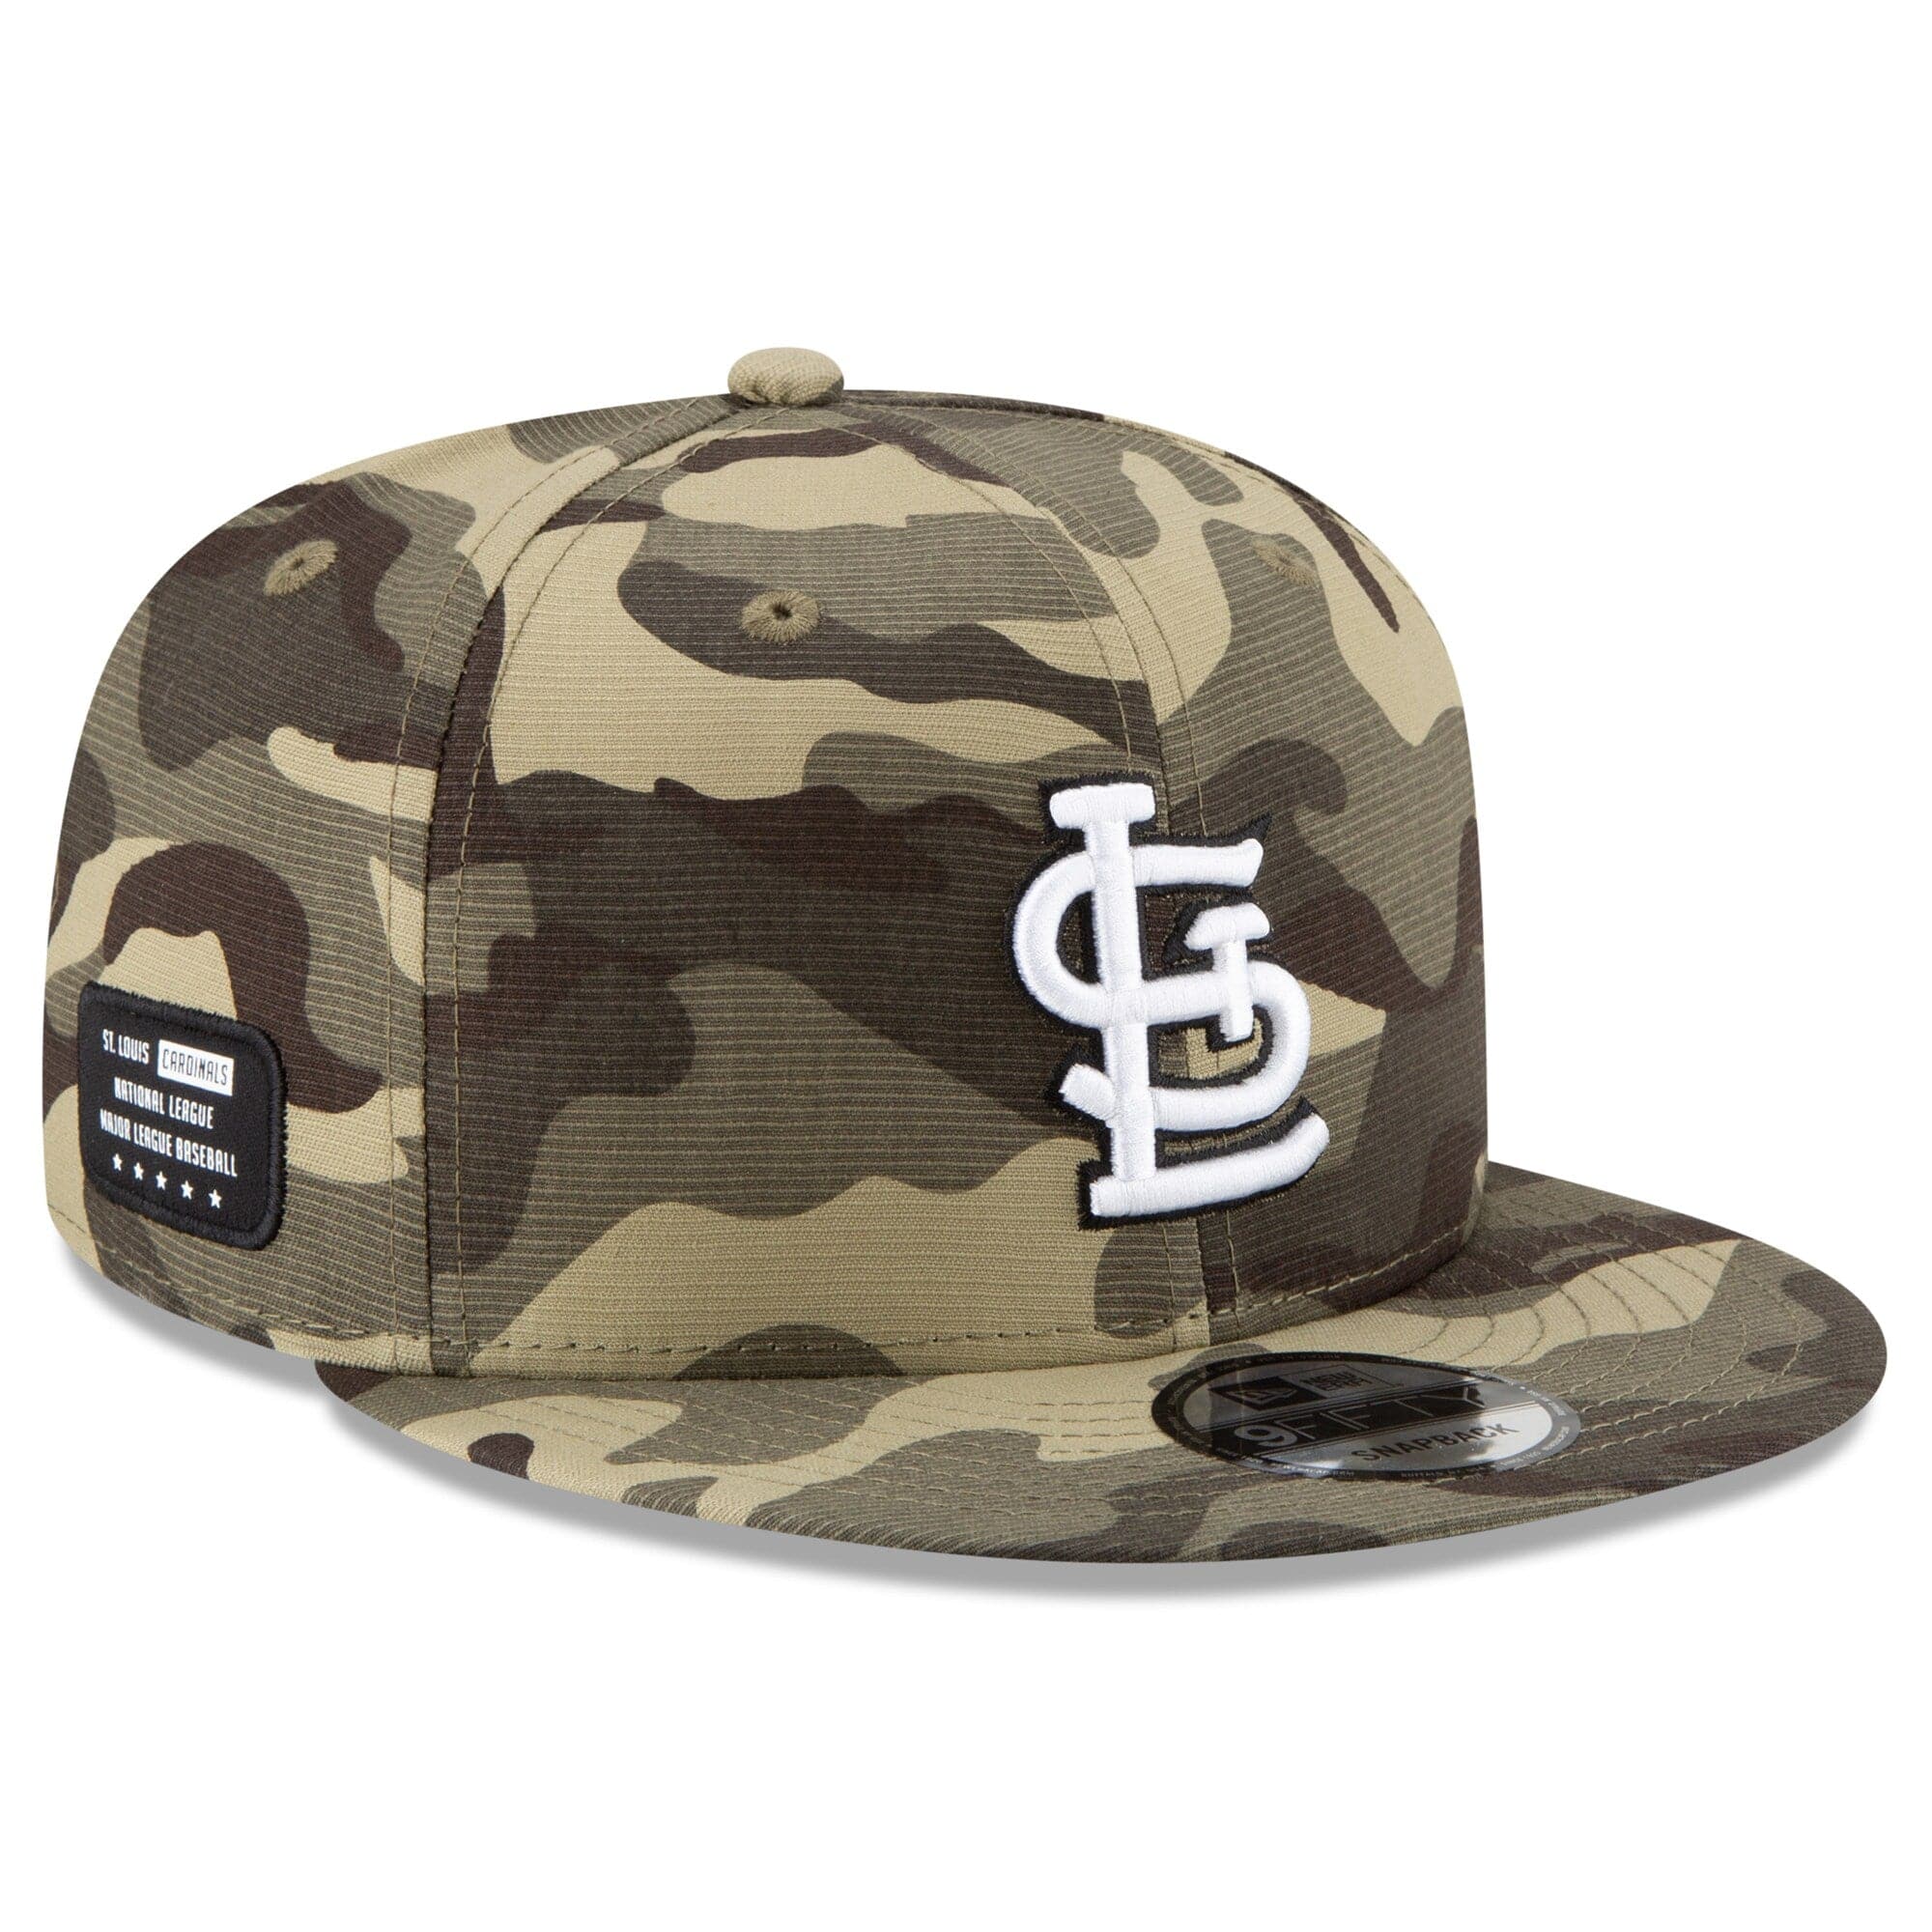 St. Louis Cardinals New Era MLB 2021 Armed Forces 9FIFTY Snapback